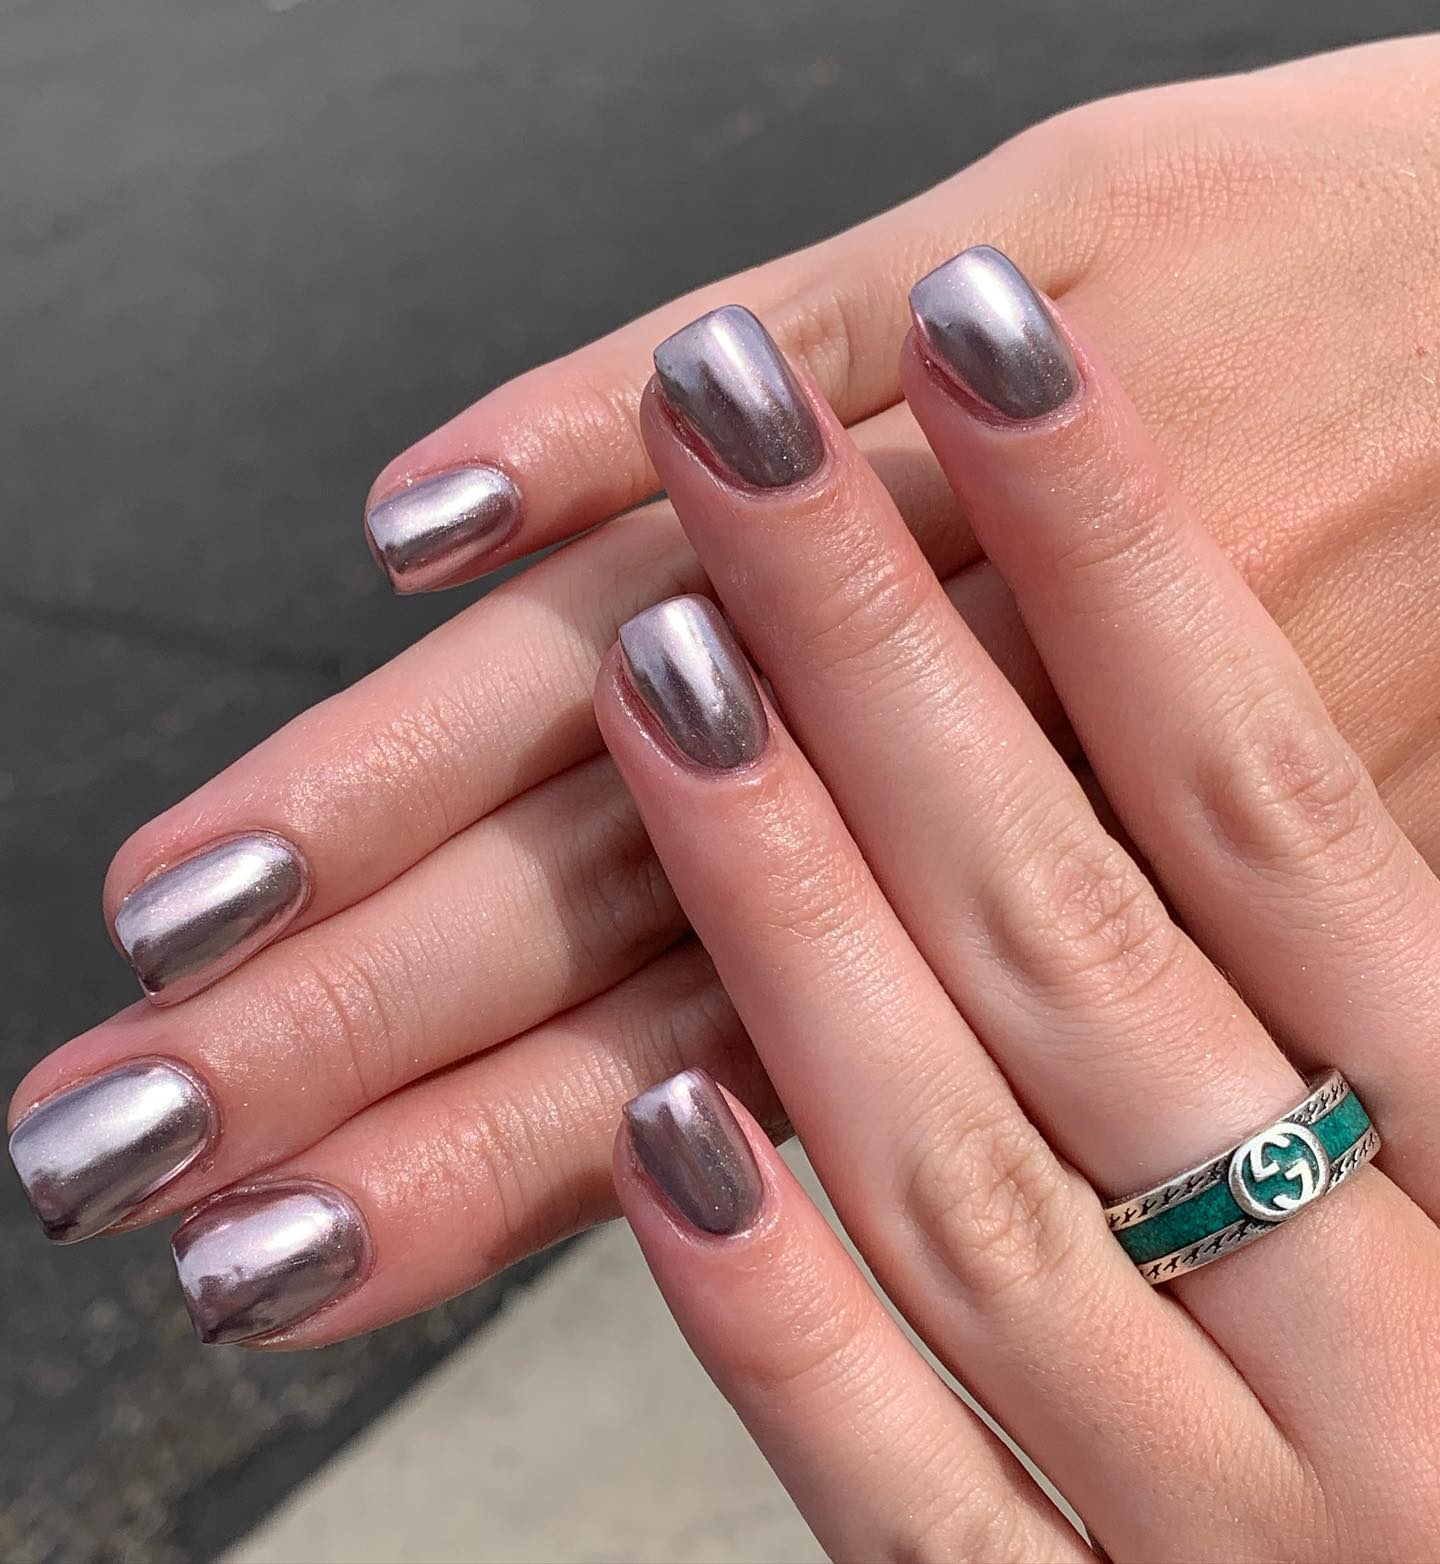 When we talk about chromes, one of the best colors is silver for sure. With a short square mani, you will look amazing.